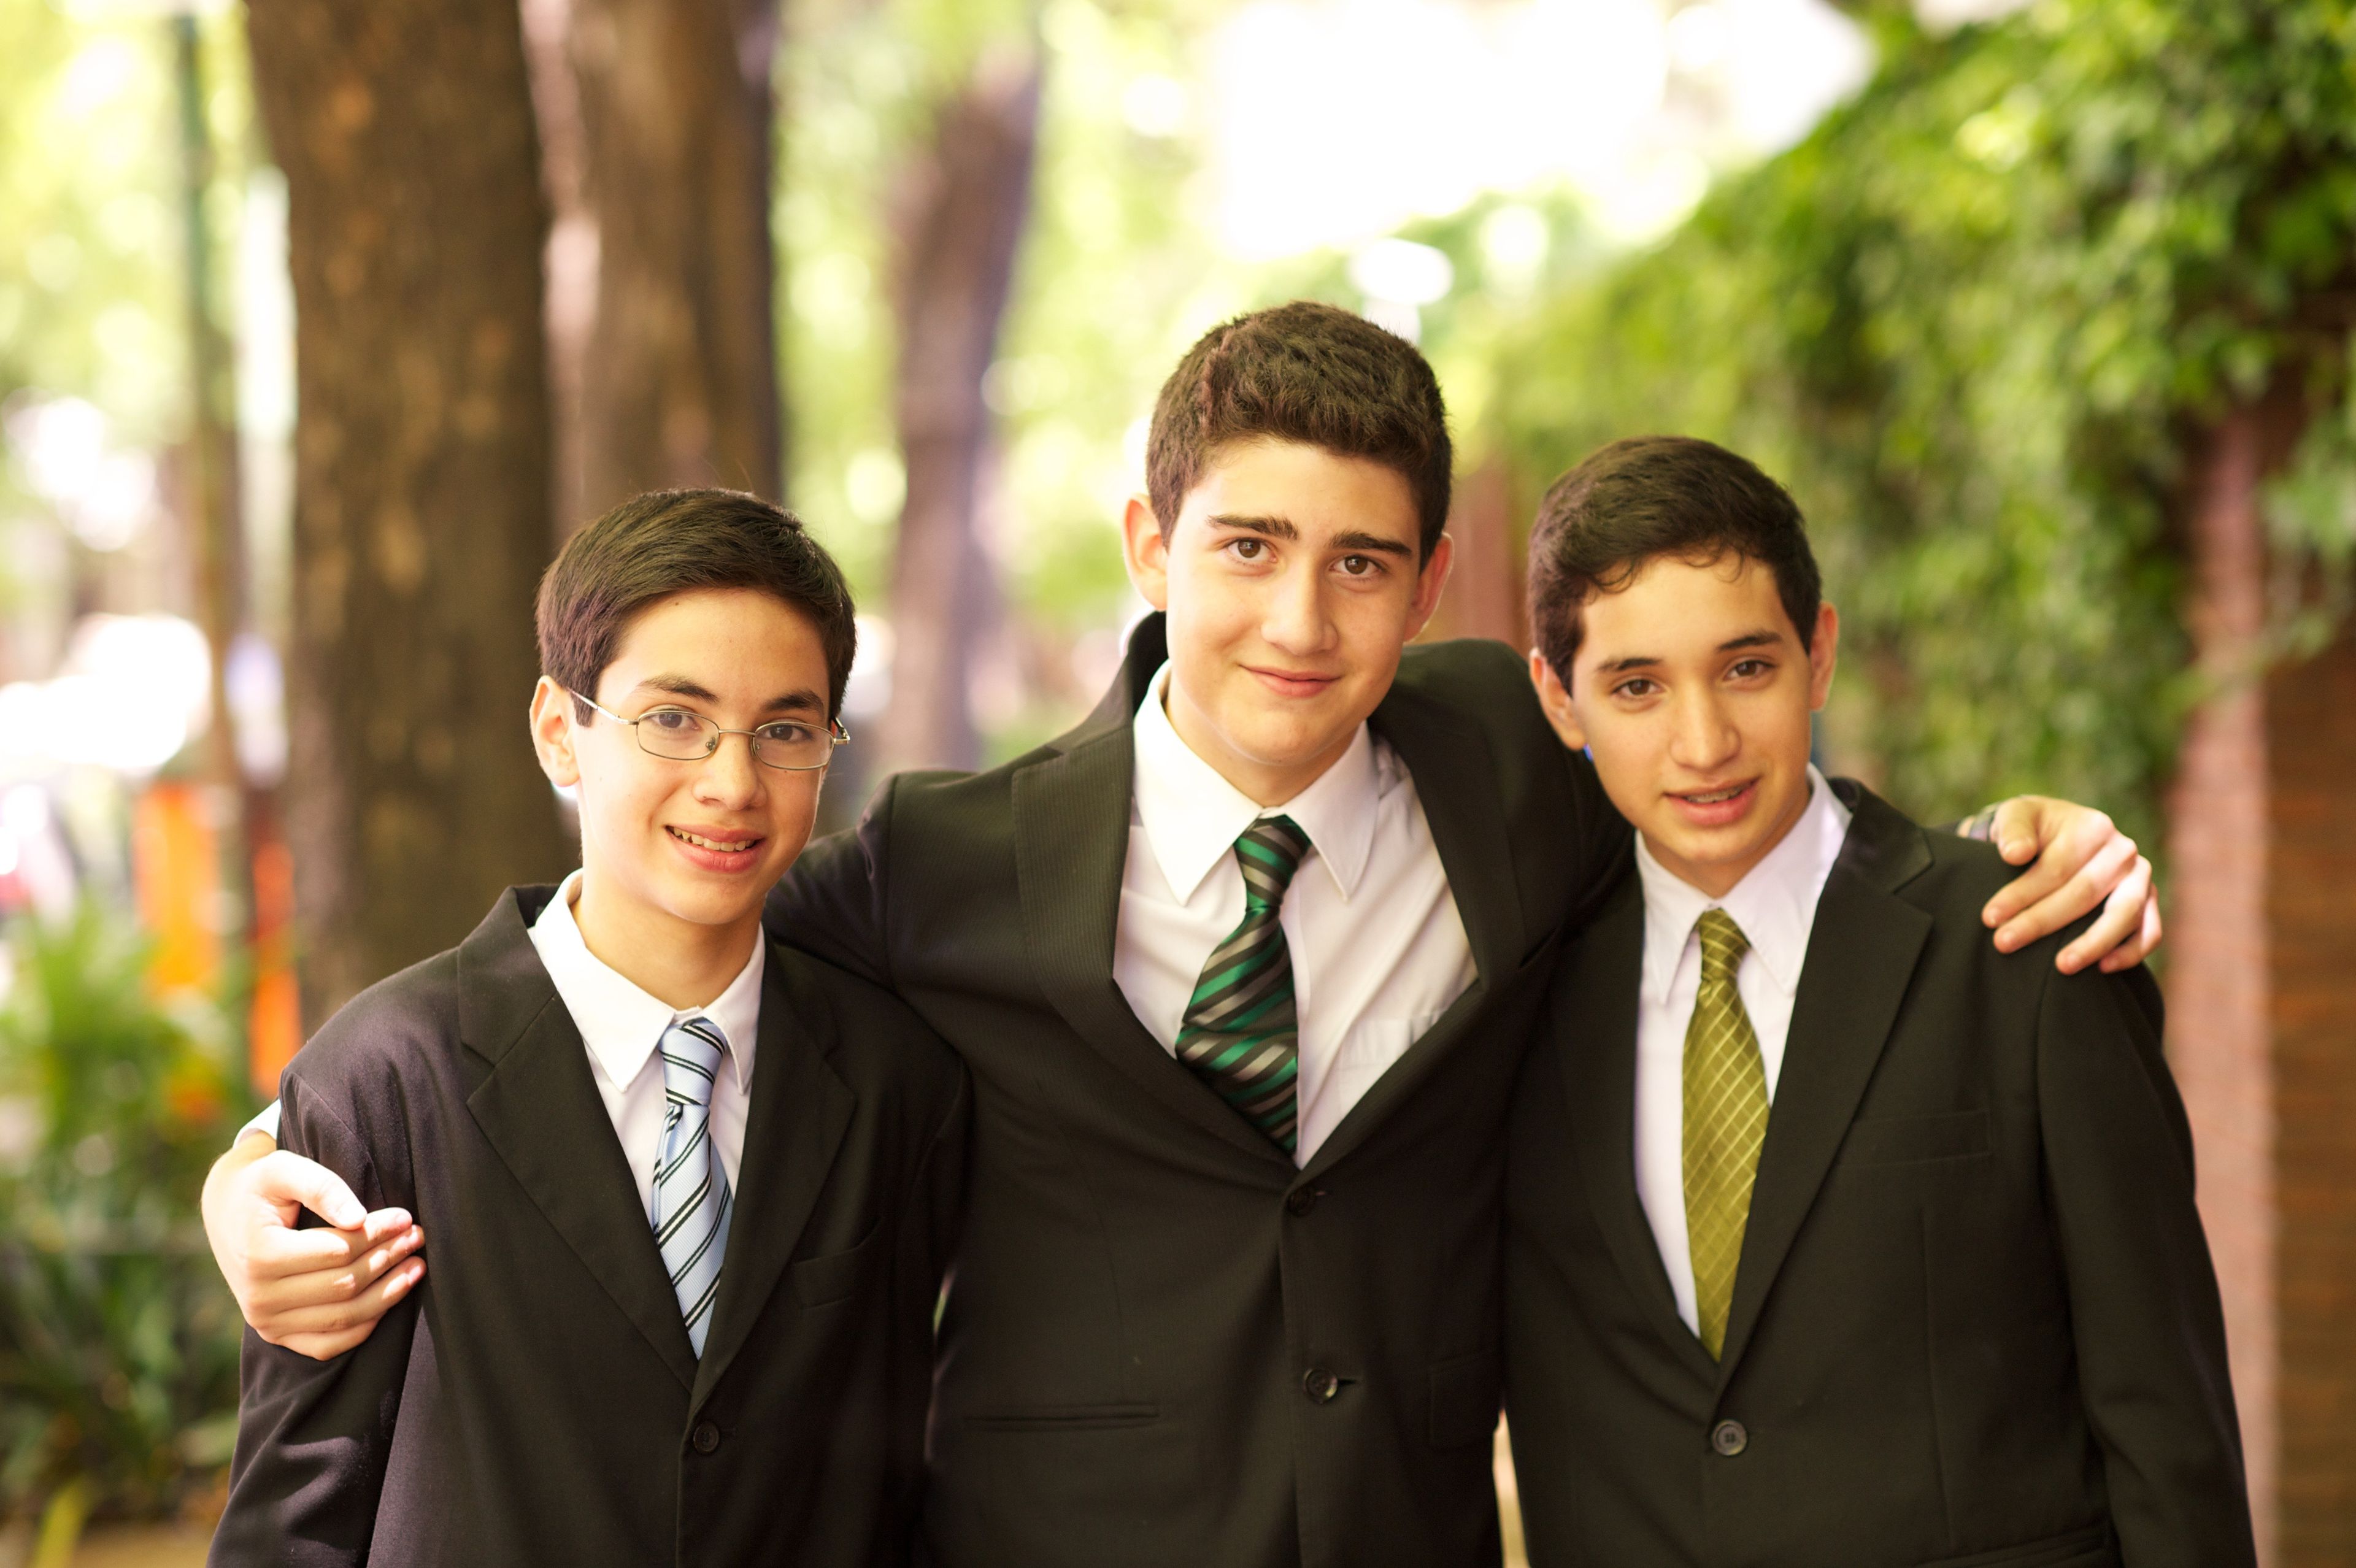 A portrait of three young men in suits and ties, standing side by side and smiling.